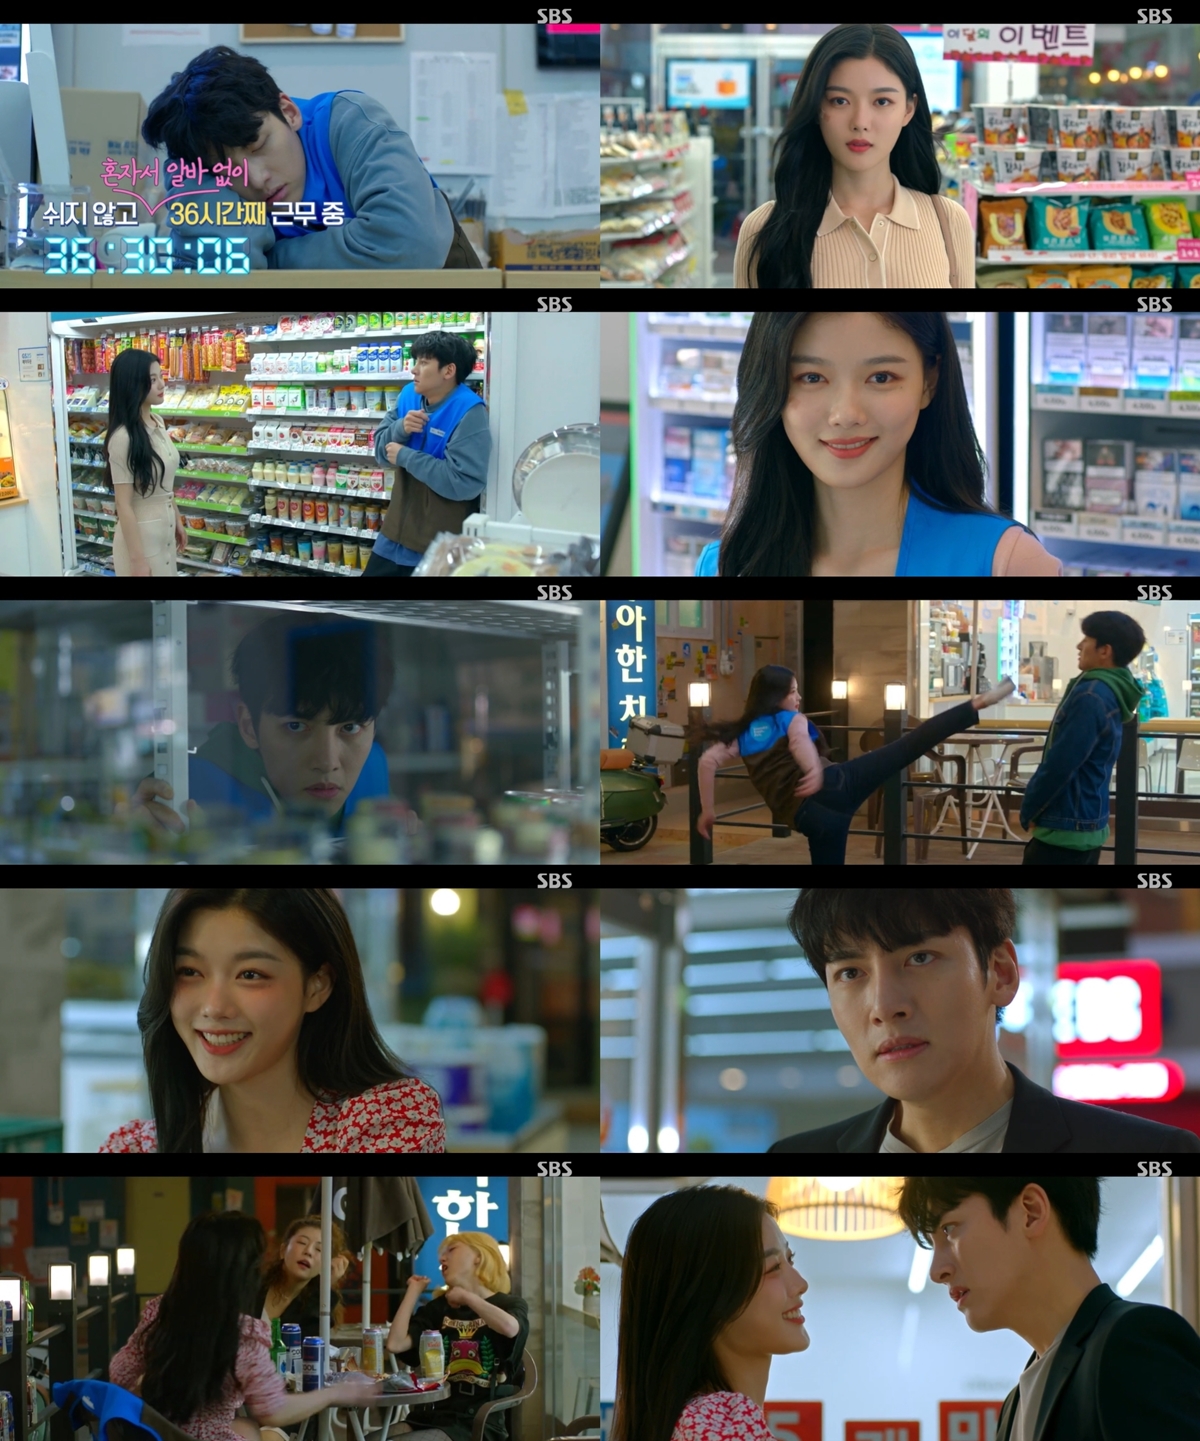 The Prediction of the Convenience store Morning Star Ji Chang-wook Kim Yoo-jung has begun.SBSs Convenience Store Morning Star (playplay by Son Geun-joo/director Lee Myung-woo/Produced Taewon Entertainment), which was first broadcast on June 19, is a comic romance that takes place on a 24-hour Convenience store, with Hunnam manager Choi Dae-heon (Ji Chang-wook) and four-dimensional albasaeng Jeong Sae-byeol (Ji Chang-wook) Yoo-jung) opened the first door of Lamar Jackson by opening the beginning of the relationship.The first broadcast started with 7.3% of the highest TV viewer ratings per minute (Nilson Korea, based on the metropolitan area) and the first place in real-time search terms, and attracted viewers with the unique and unique character, the Hot Summer Days of Actors,On this day, Choi Dae-heon, who reunited at the Convenience store after the first meeting that was intense three years ago, was portrayed.Choi Dae-heon, who runs a Convenience store in the neighborhood, was running a Convenience store with difficulty with his family due to poor sales.Choi Dae-heon, who was trying to save a penny, was on a 40-hour nonstop job and an Alba volunteer appeared just before he fell.Choi Dae-heon felt cheap somewhere, and remembered who the star was: a bad high school student he had met three years ago.However, during an interview with Alba, Choi Dae-heon could not bear sleepiness in the aftermath of his overnight work, and when he opened his eyes, he was working on the Convenience store on his behalf.Inevitably, Choi Dae-heon hired a star as a temporary alba, and the two peoples predictions began to live in the Irreplaceable You Convenience store.Choi Dae-heon, a manager who can not put a doubt on the star of the star, and the figure of the star-filled star who is full of the charm of catching him, explosed the charm by contrasting the drama and the pole character.Actor customizing Acting, which has brought this personality to life, is a response that made the story more anticipated.Ji Chang-wook painted Choi Dae-heon Character with pure taste shooting, and he led the plays pleasant atmosphere with comic Hot Summer Days, which put down the weight.Kim Yoo-jung showed off the spicy action to bad high school students who are harassing the friends, and it captivated viewers by perfectly expressing the lovely charm of the star character.At the end of the broadcast, Choi Dae-heon and the ending of the premiere in front of the Convenience store of the star have amplified the curiosity for future development.Choi Dae-heon ran for a month after being informed that the star was having a night party with Friends at his Convenience store.To put a straw in my Convenience store? And Choi Dae-heon, who calls for a star, laughed and laughed, and the ending of the star, which welcomed him, showed off the chemistry of the hallucination and raised expectations for the next story.Viewers who watched the broadcast on the day said, Unconditionally,Ji Chang-wook - Kim Yoo-jung Fighting , Kim Yoo-jung is really pretty , I was funny without knowing how time was going , I watched while laughing for an hour.It is a big hit.Meanwhile, the second episode of SBSs Convenience store Morning Star, which captivated viewers with its charming character from the first episode, will air at 10 p.m. today (20th).iMBC  SBS Screen Capture